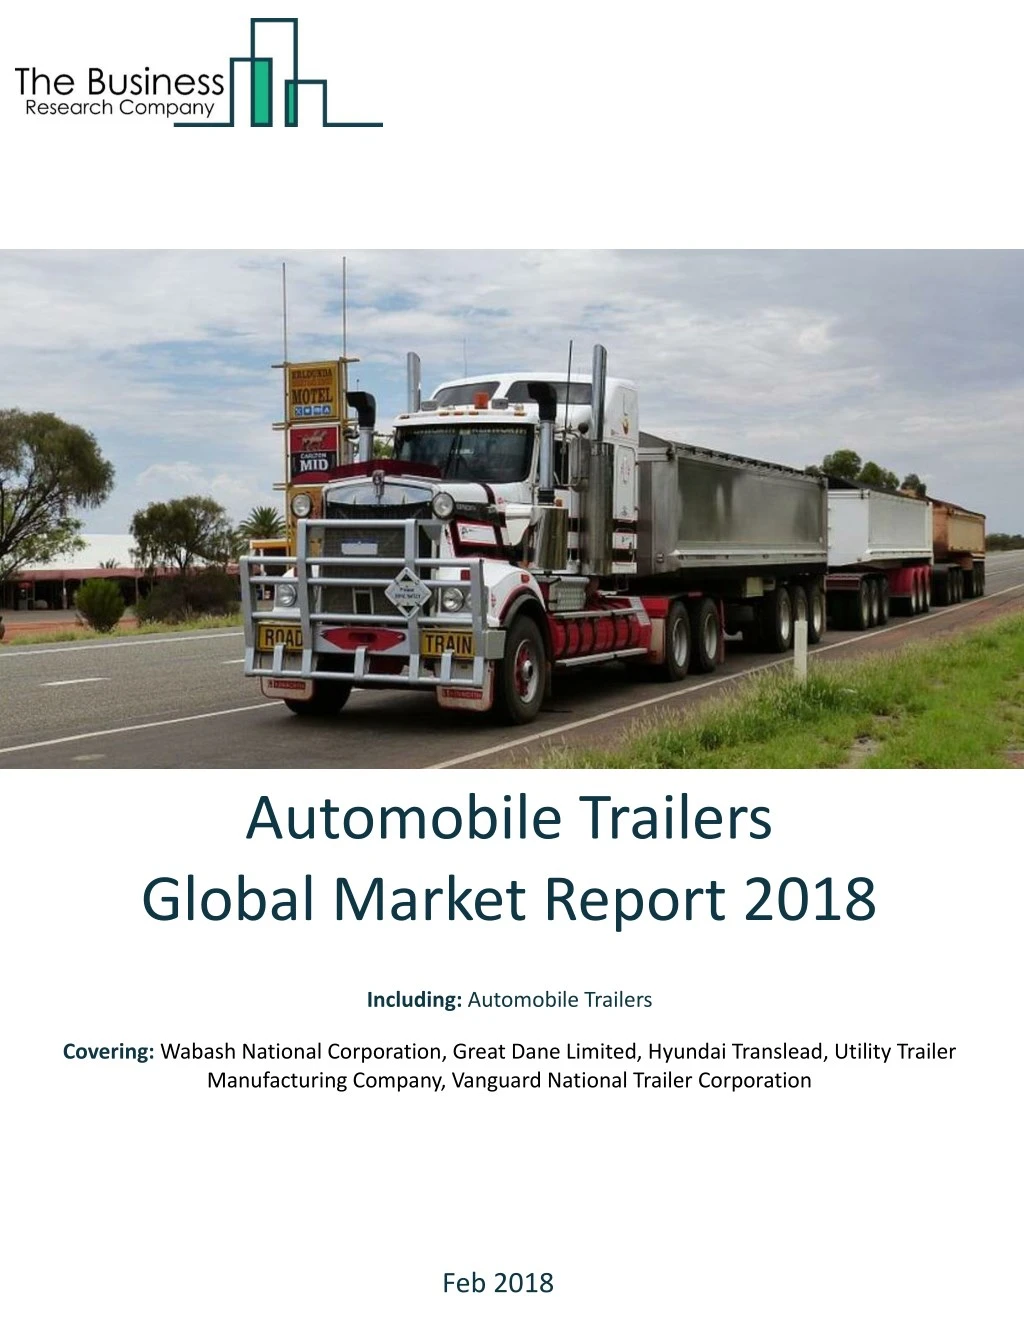 automobile trailers global market report 2018